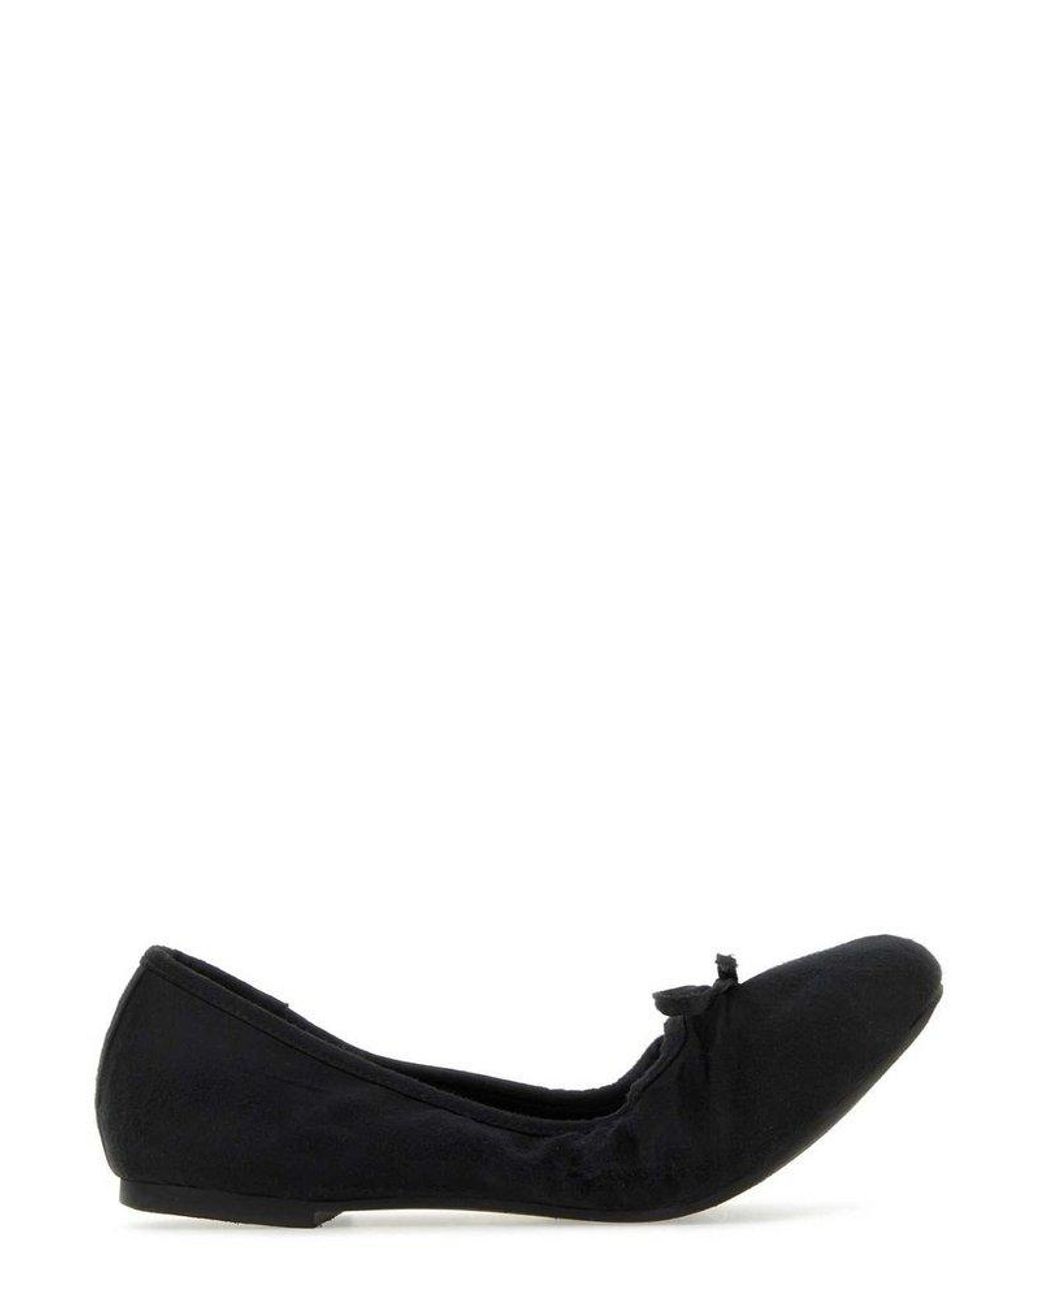 Balenciaga Leopold Worn-out Ballerina Shoes in Black | Lyst